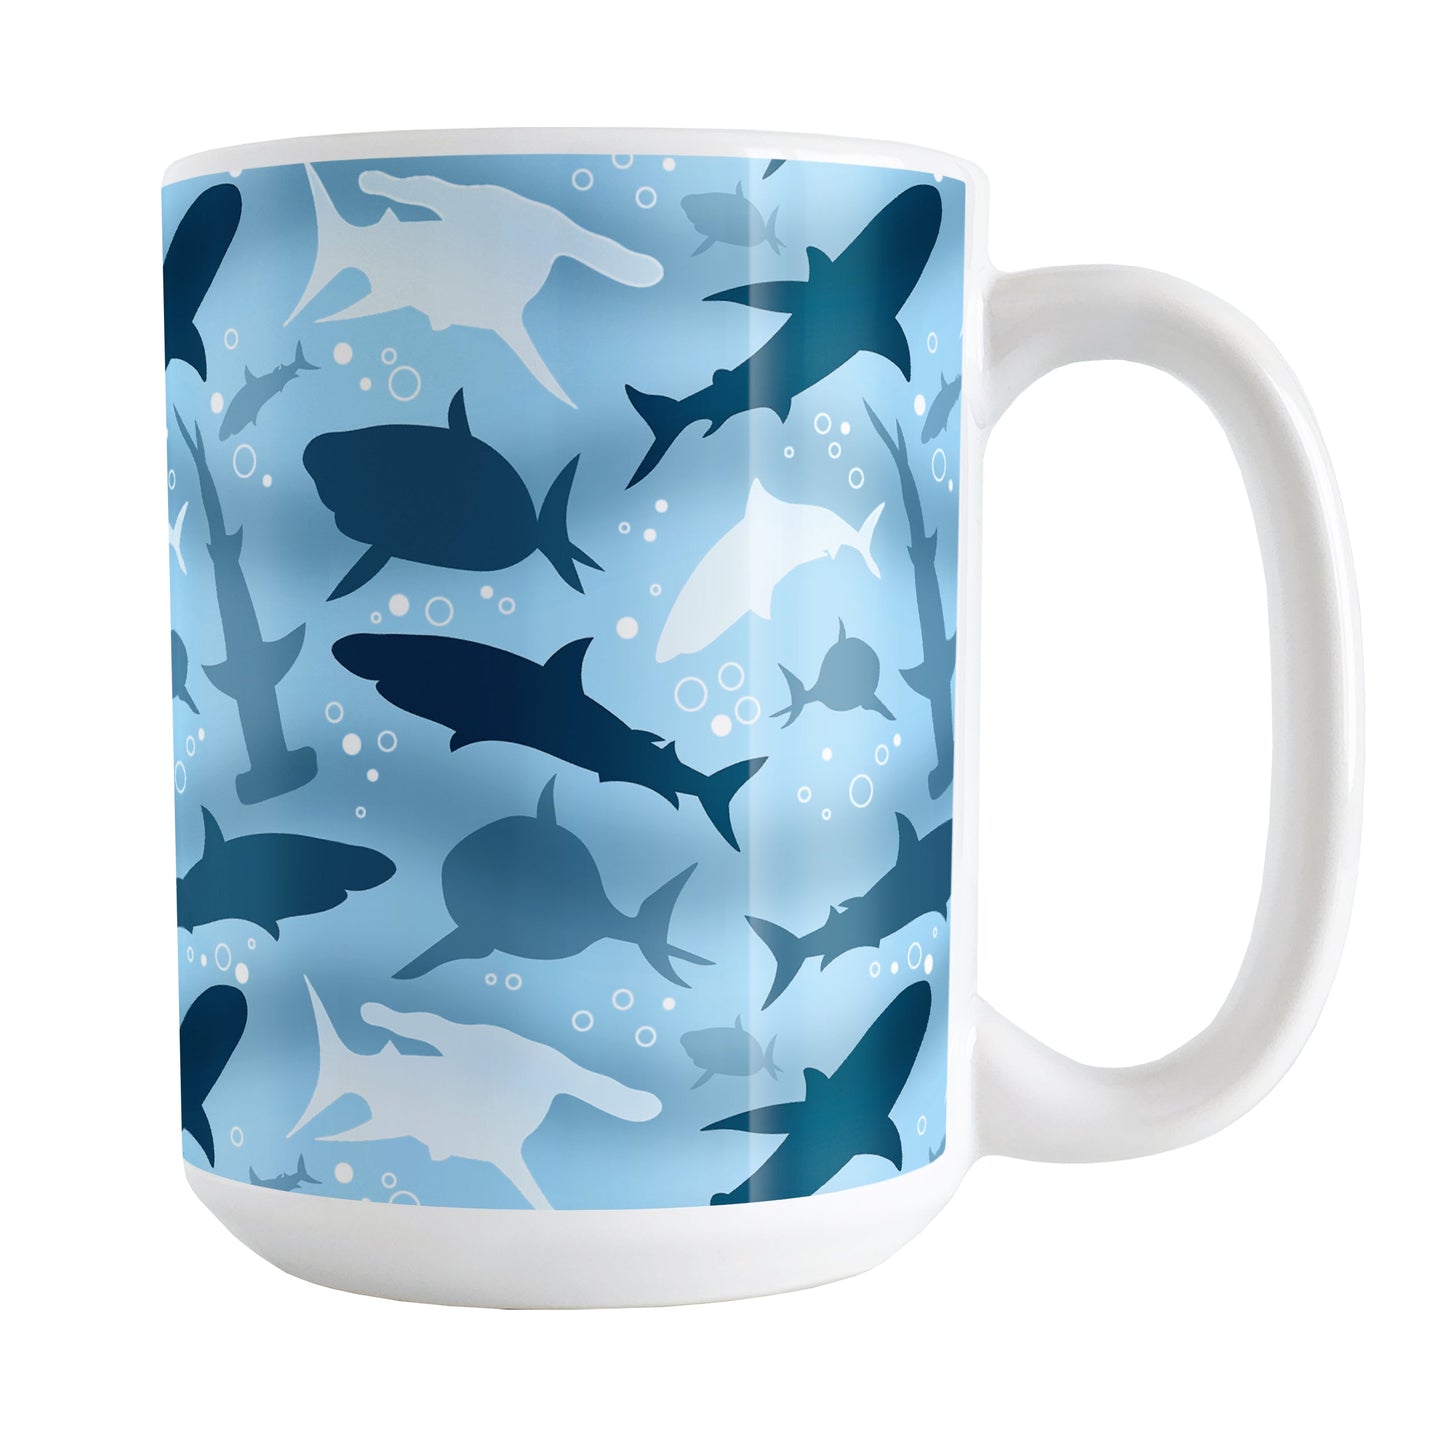 Blue Frenzy Sharks Mug (15oz) at Amy's Coffee Mugs. A ceramic coffee mug designed with a pattern of sharks in different shades of blue, in a frenzy deep beneath the water, that wraps around the mug to the handle.